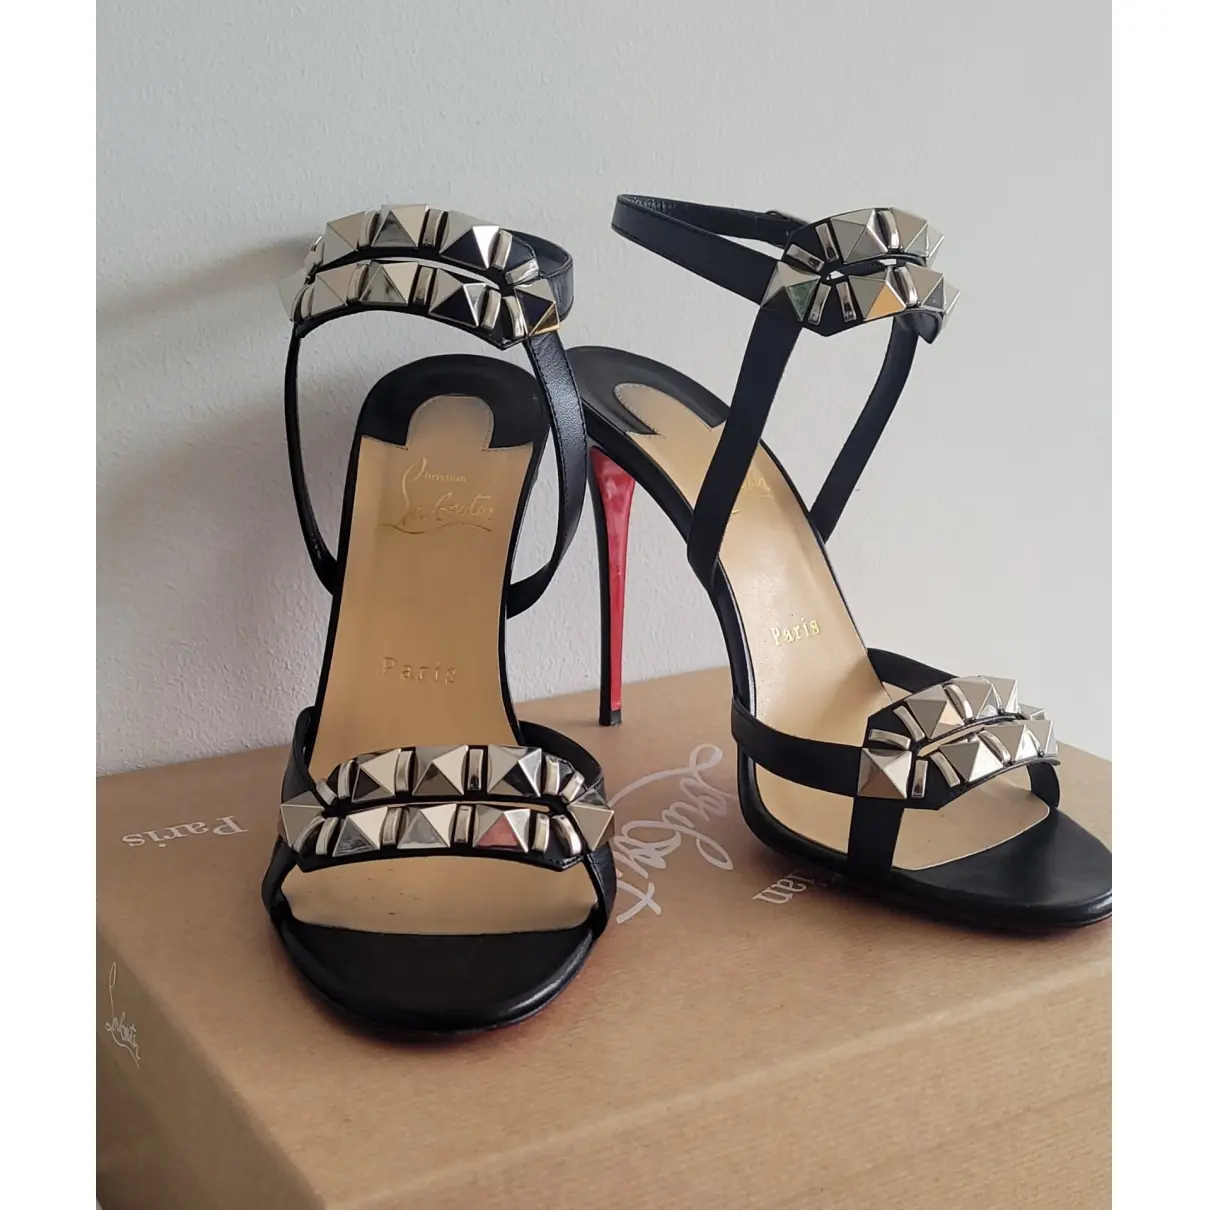 Buy Christian Louboutin Leather sandals online